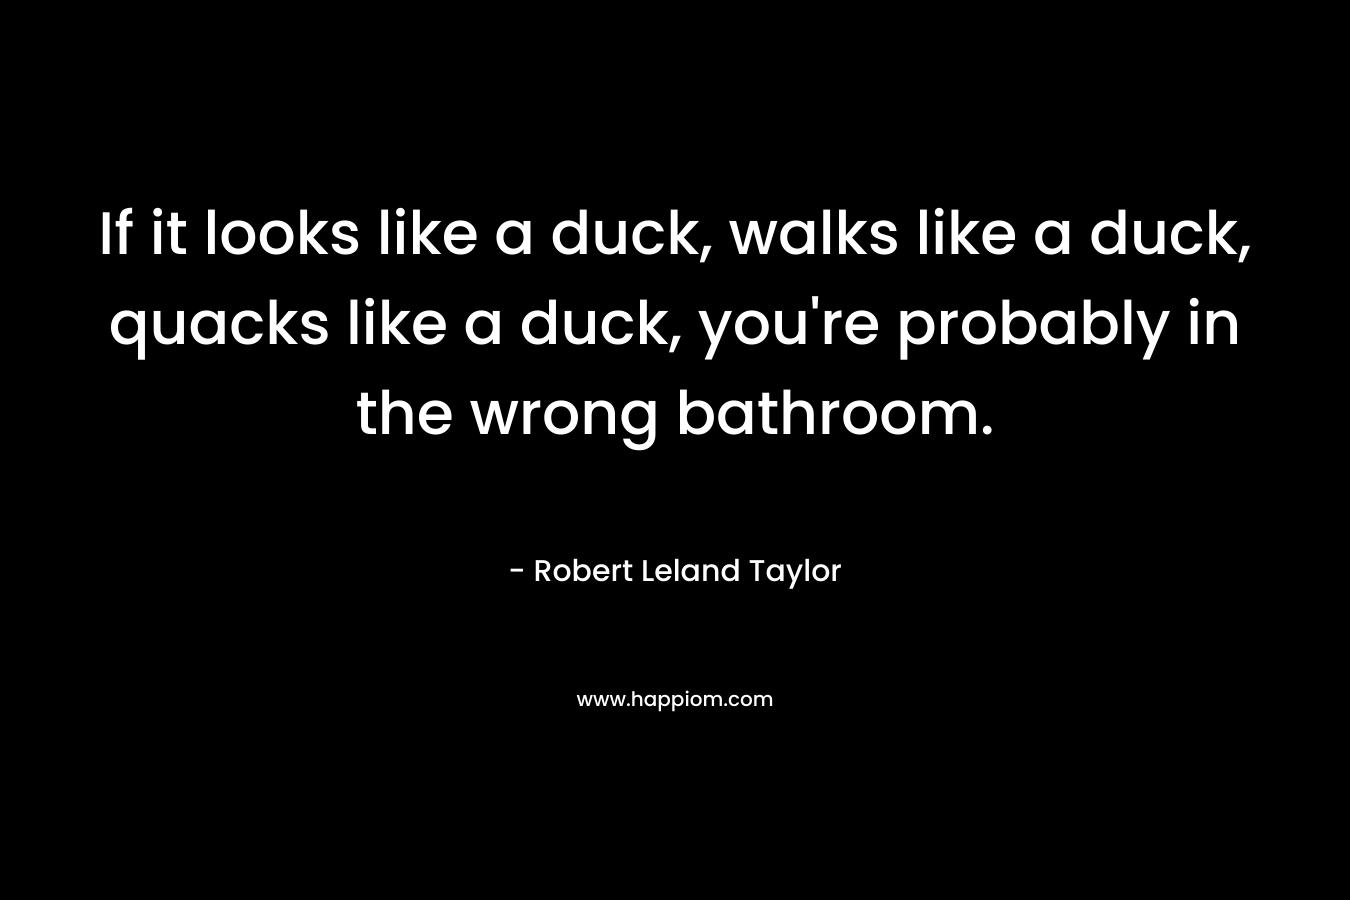 If it looks like a duck, walks like a duck, quacks like a duck, you’re probably in the wrong bathroom. – Robert Leland Taylor